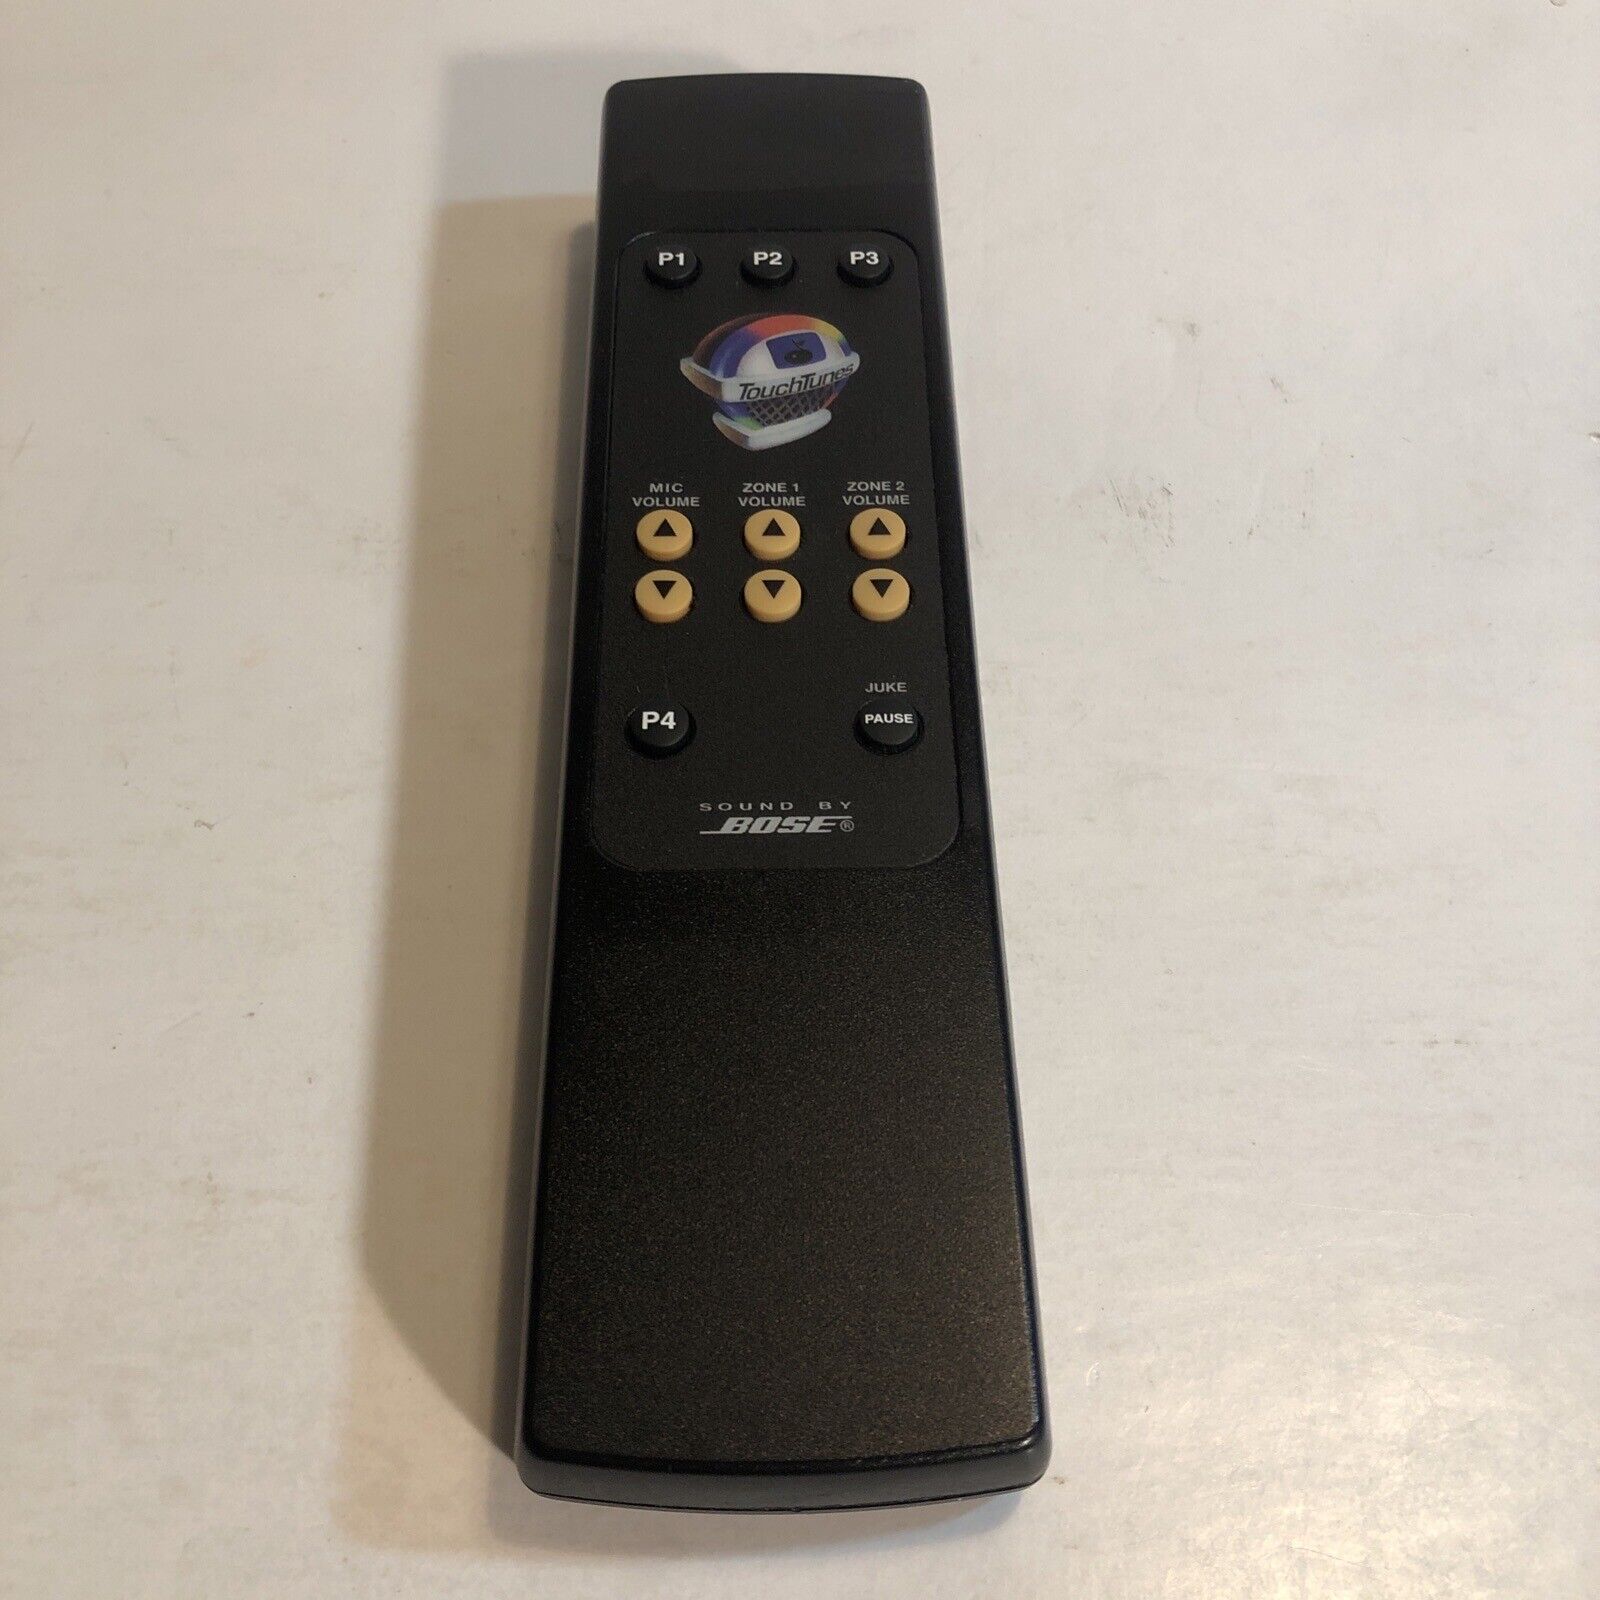 Touchtunes Remote Control For Parts Or Repair Selling As Is